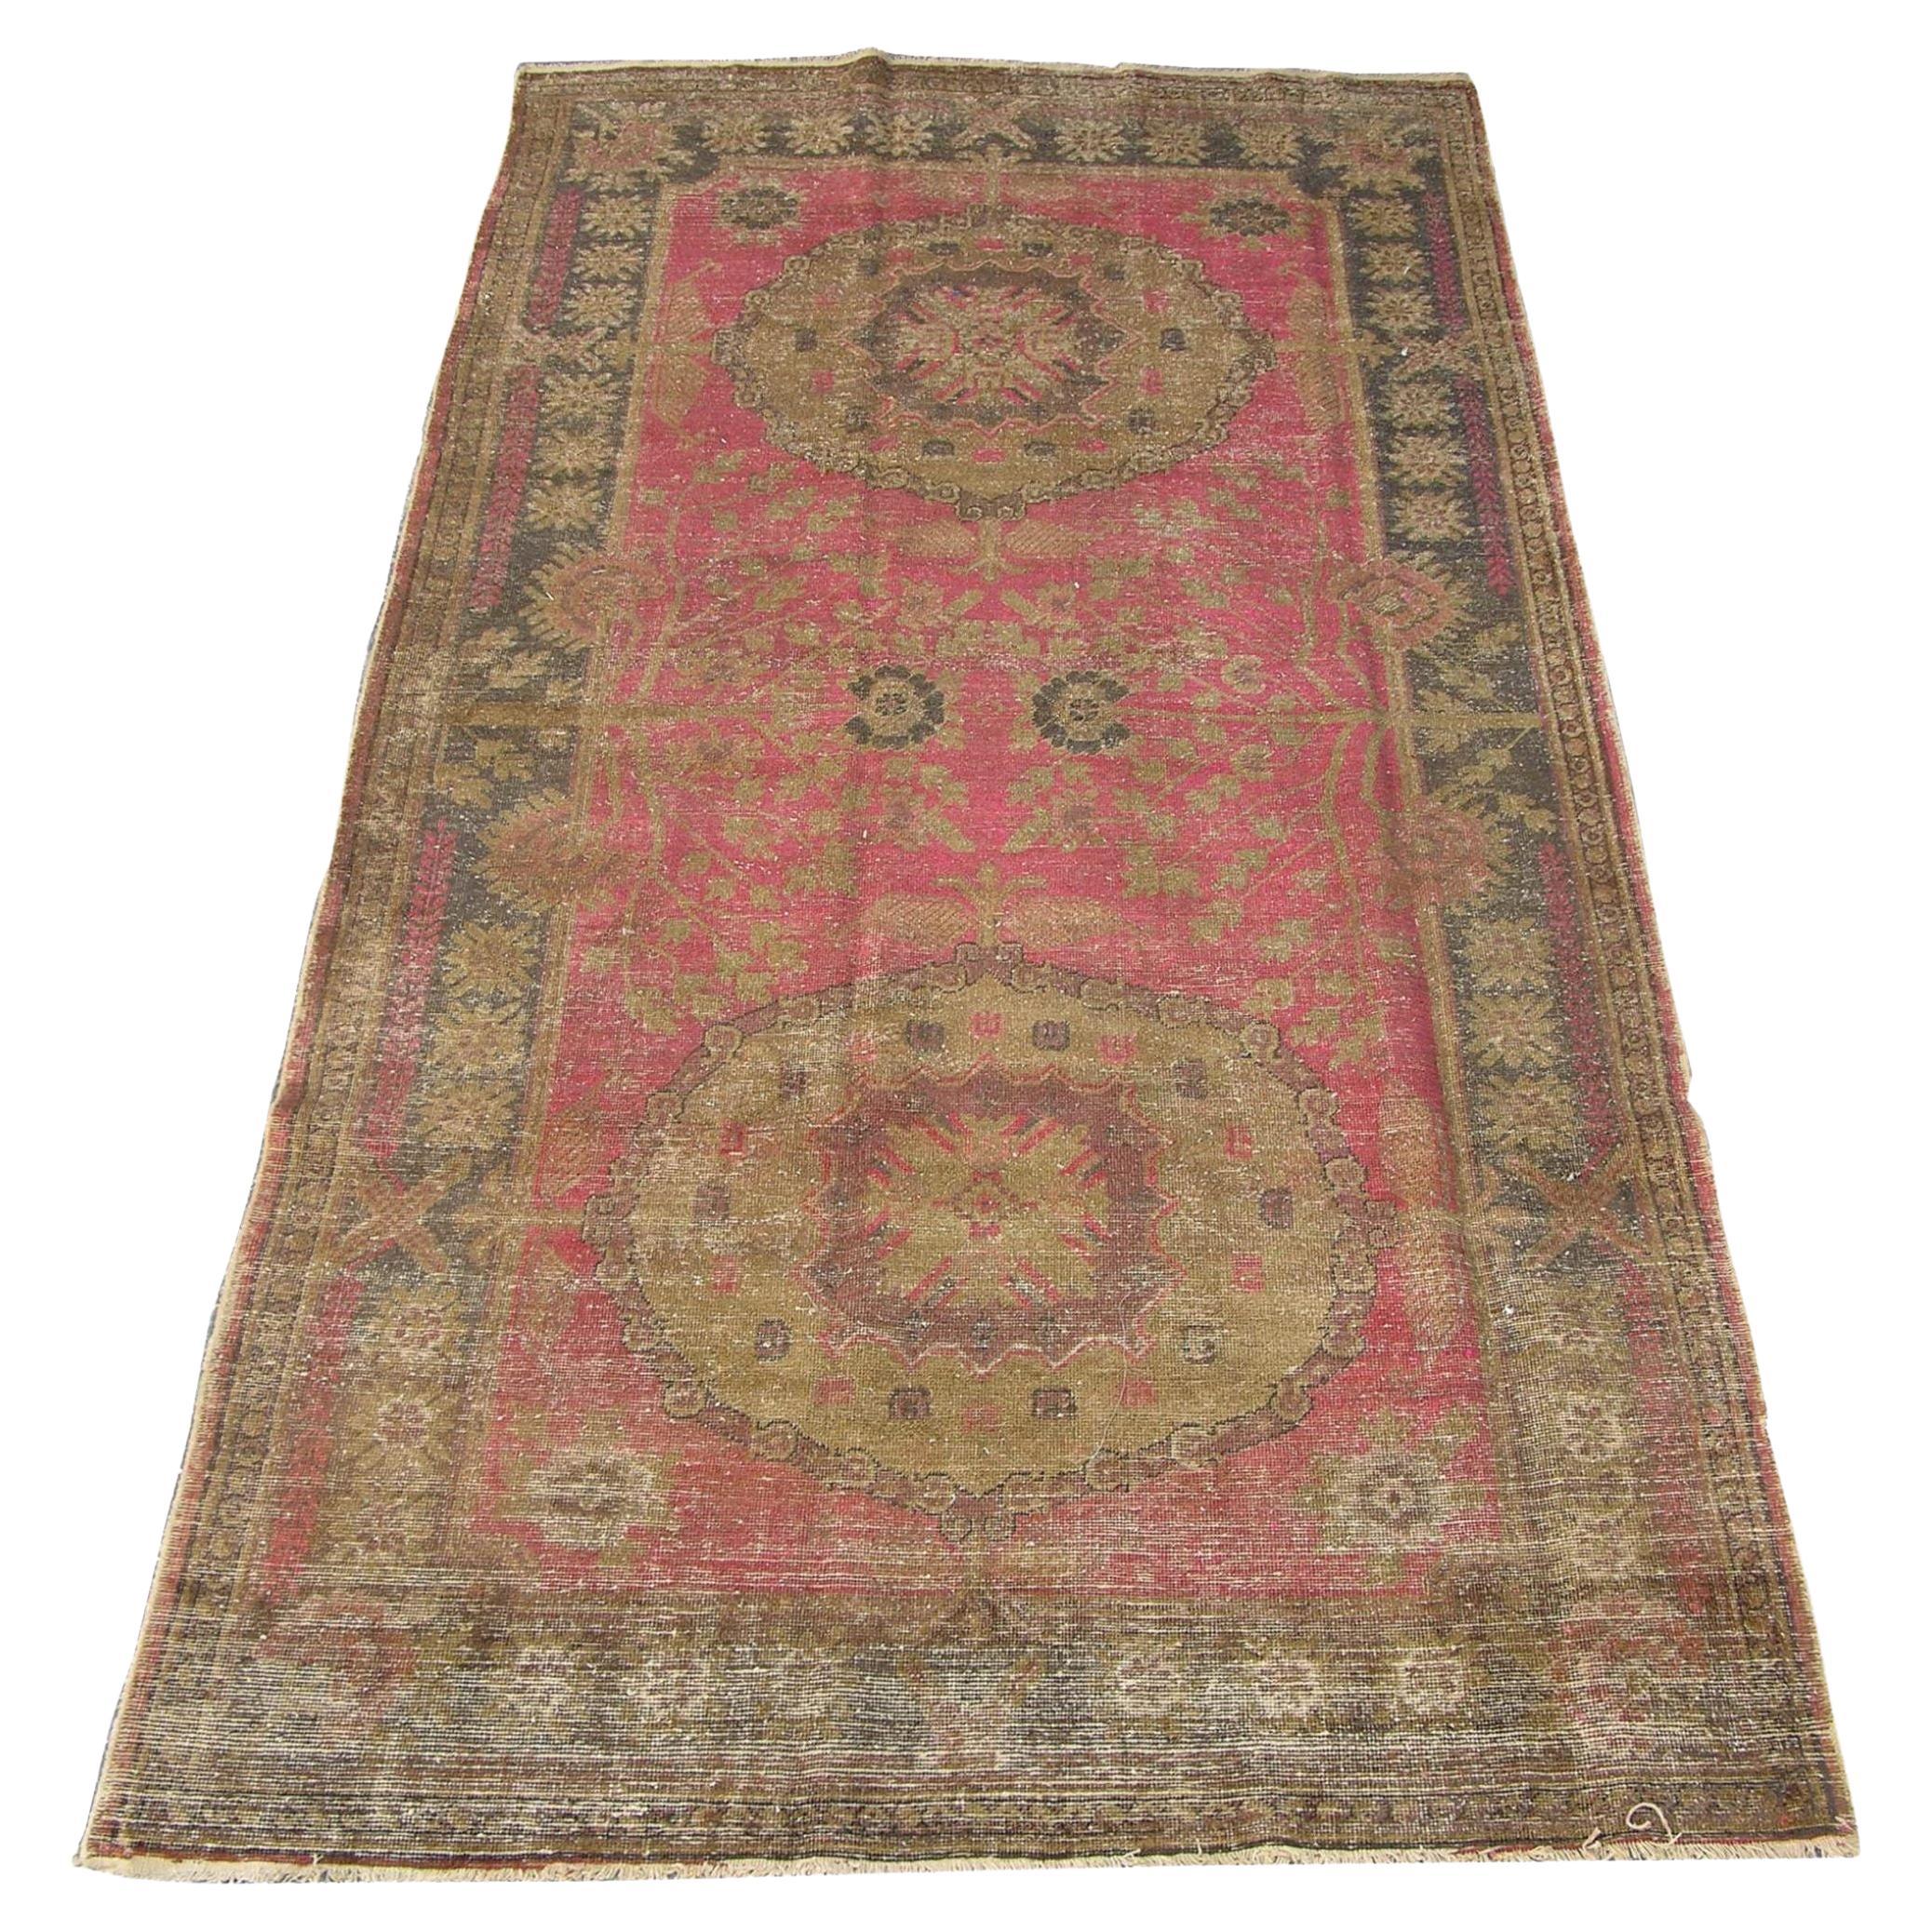 Early 20th Century Antique Samarkand Rug